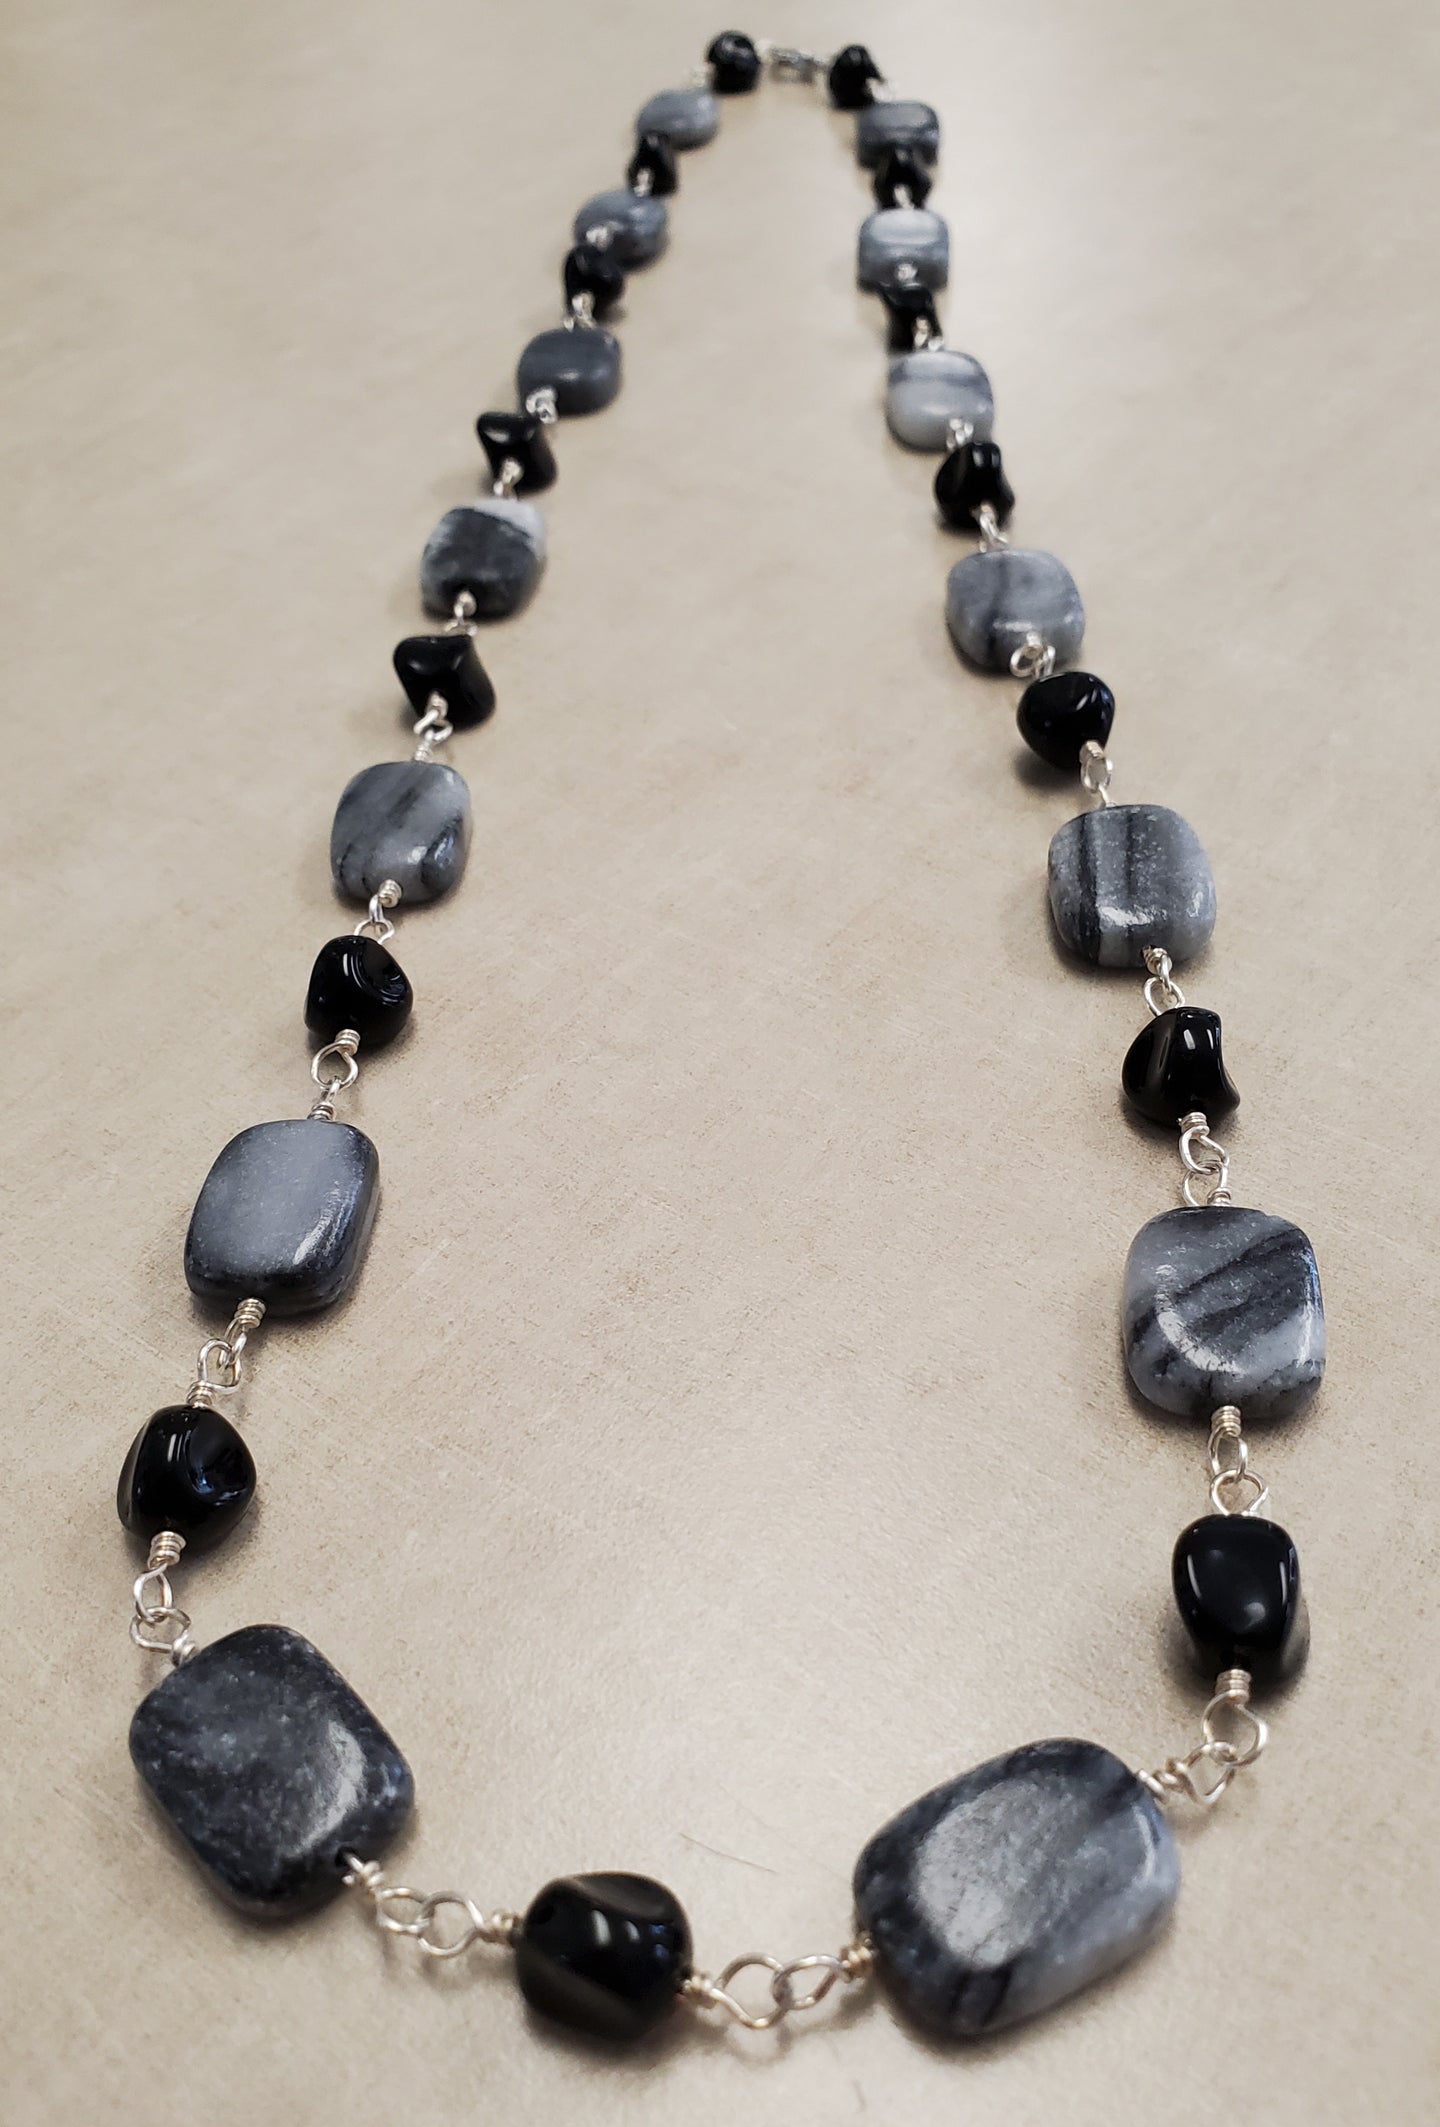 Necklace w/ Gray and Black Stones